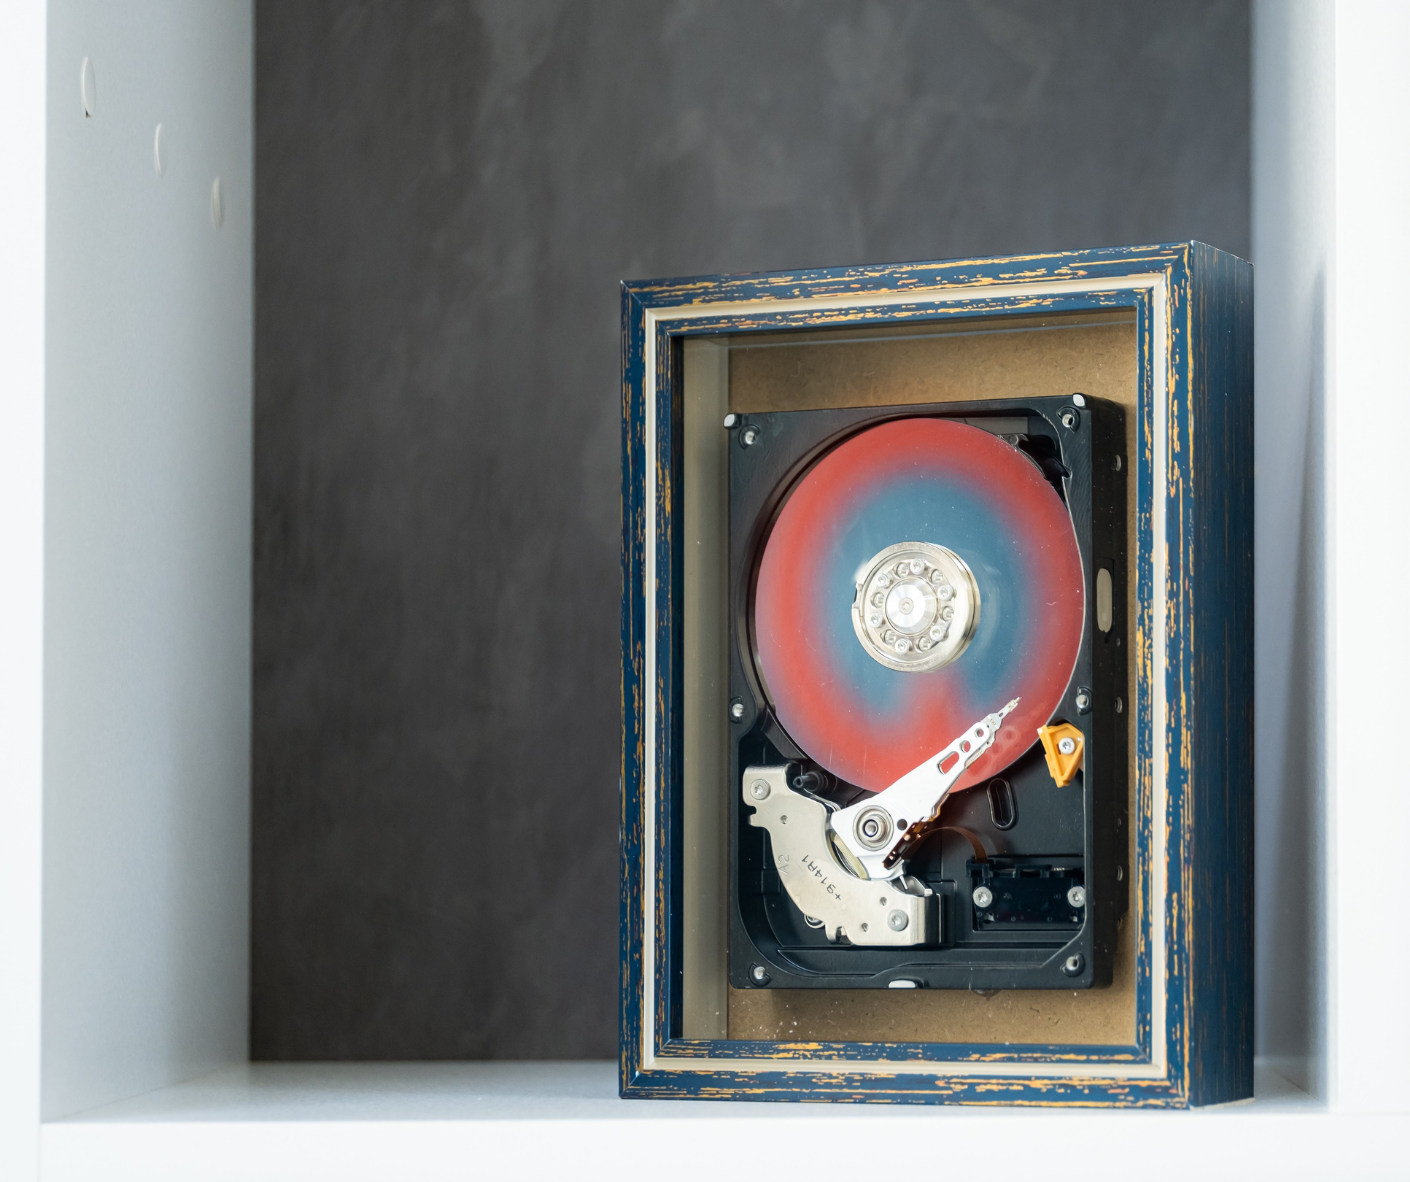 Hard-drive-in-weathered-picture-frame